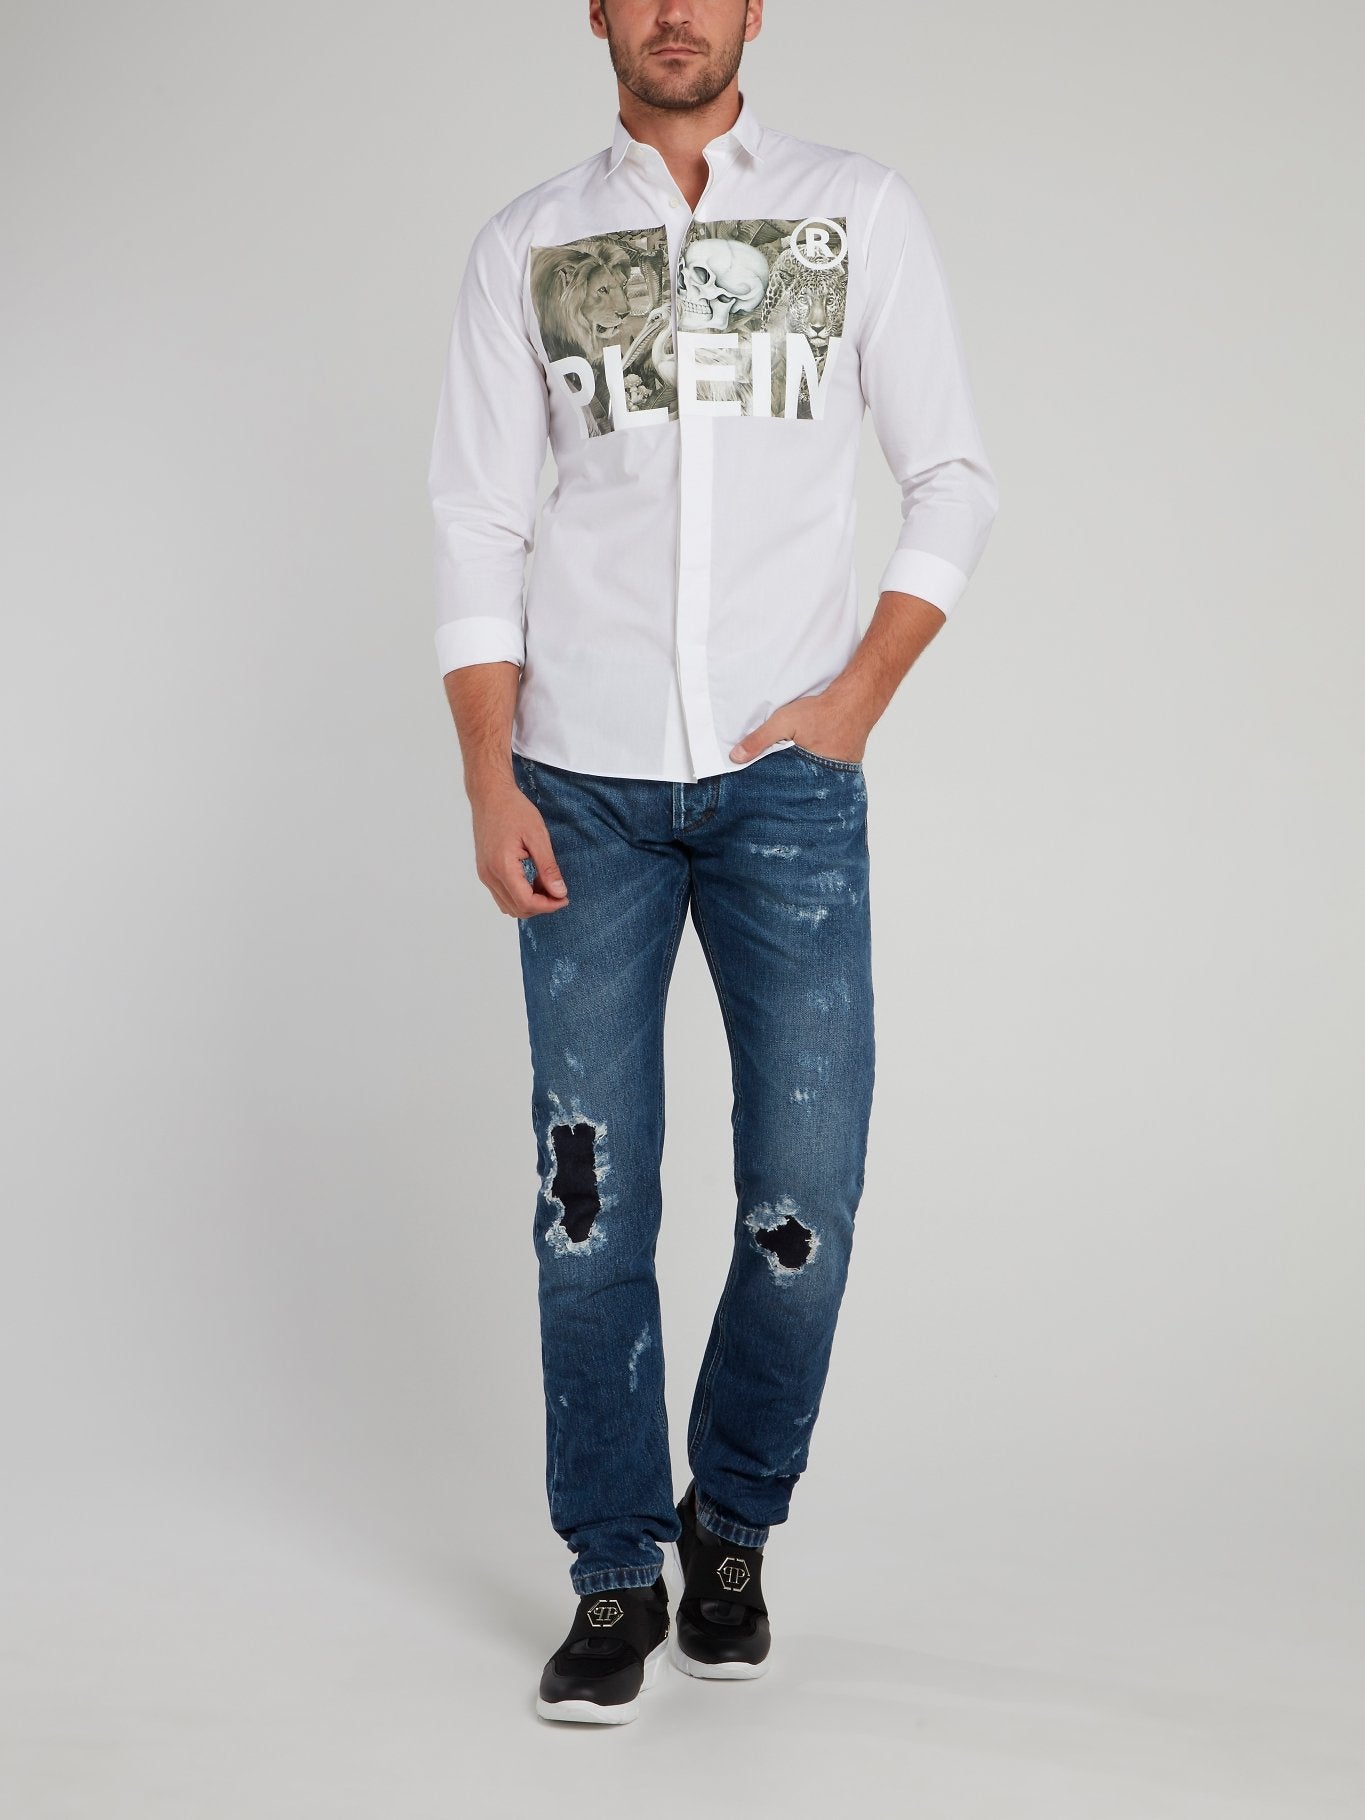 Blue Distressed Straight Cut Jeans